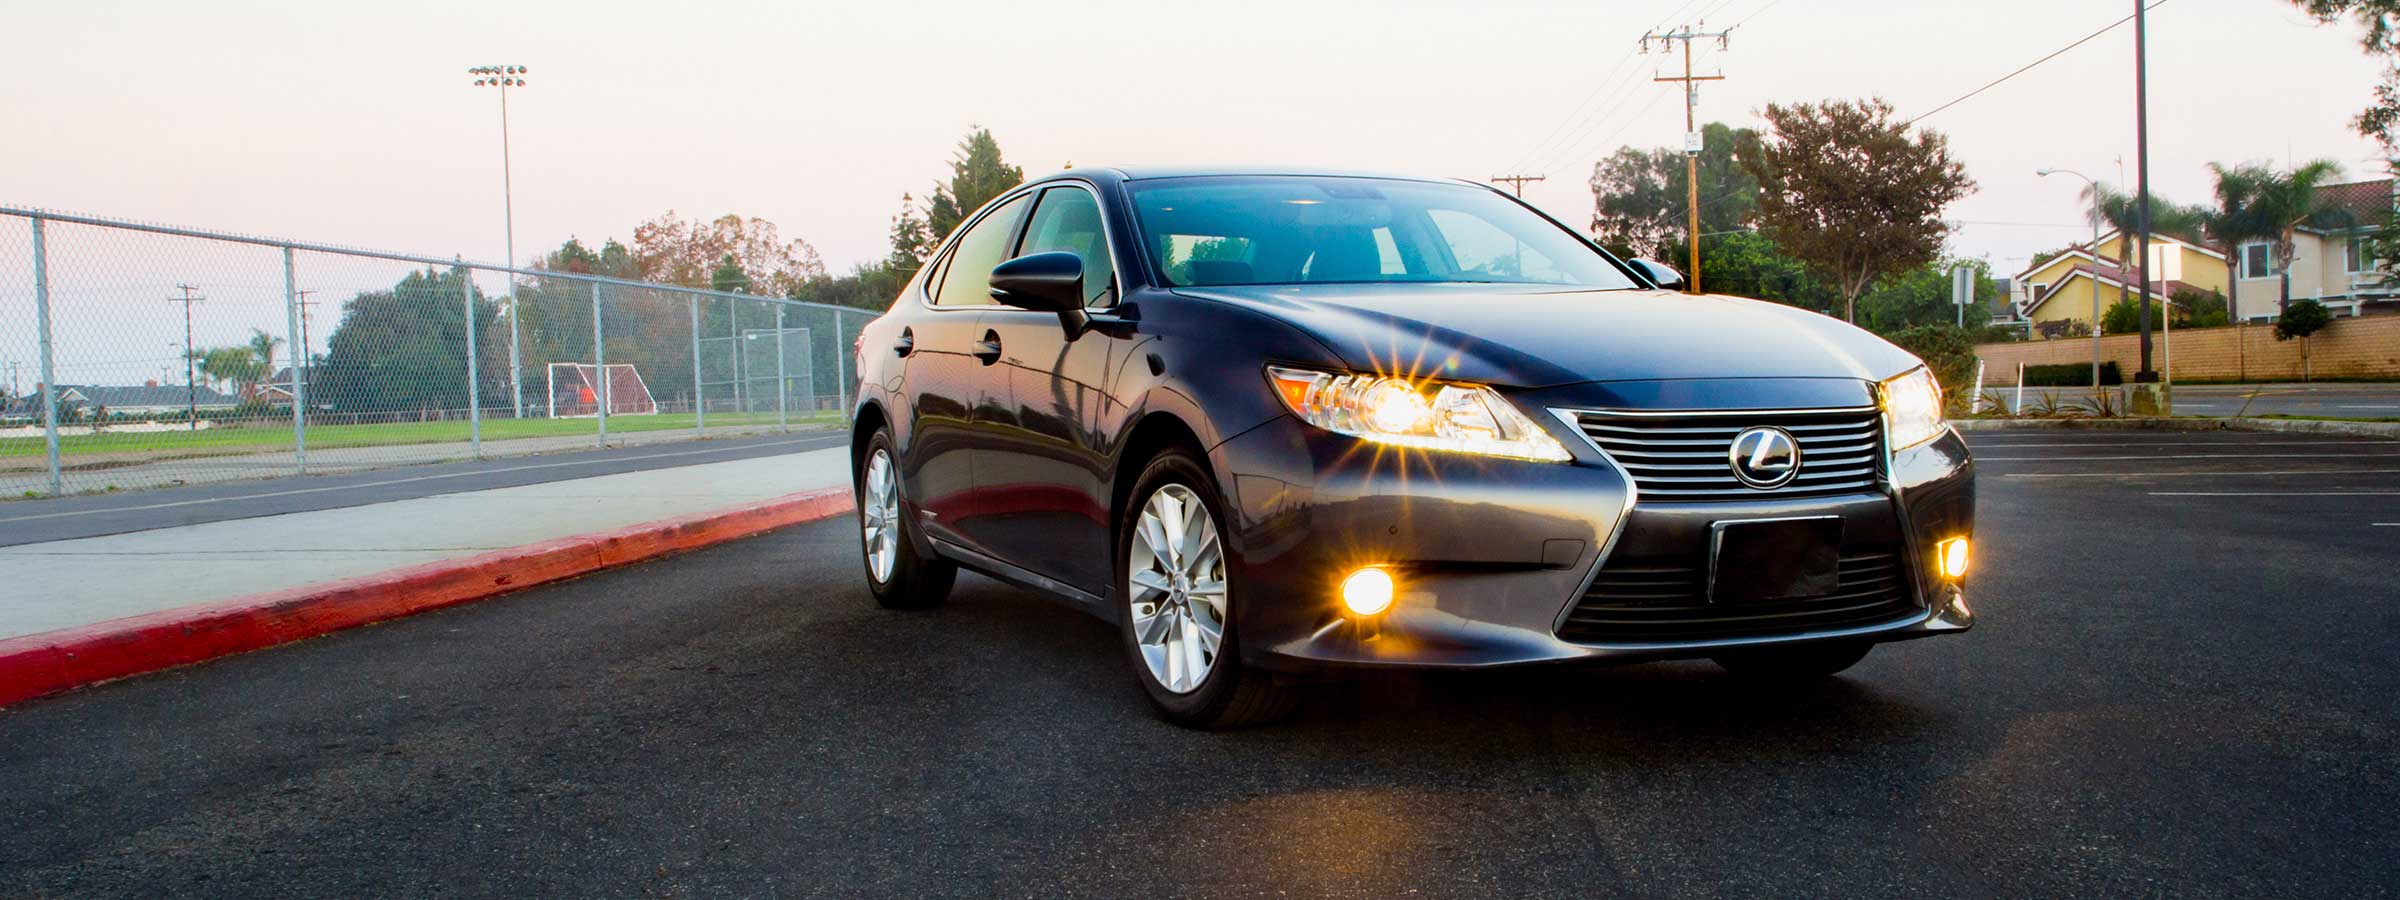 Lexus for Sale in Delran, NJ at Keystone Auto Group